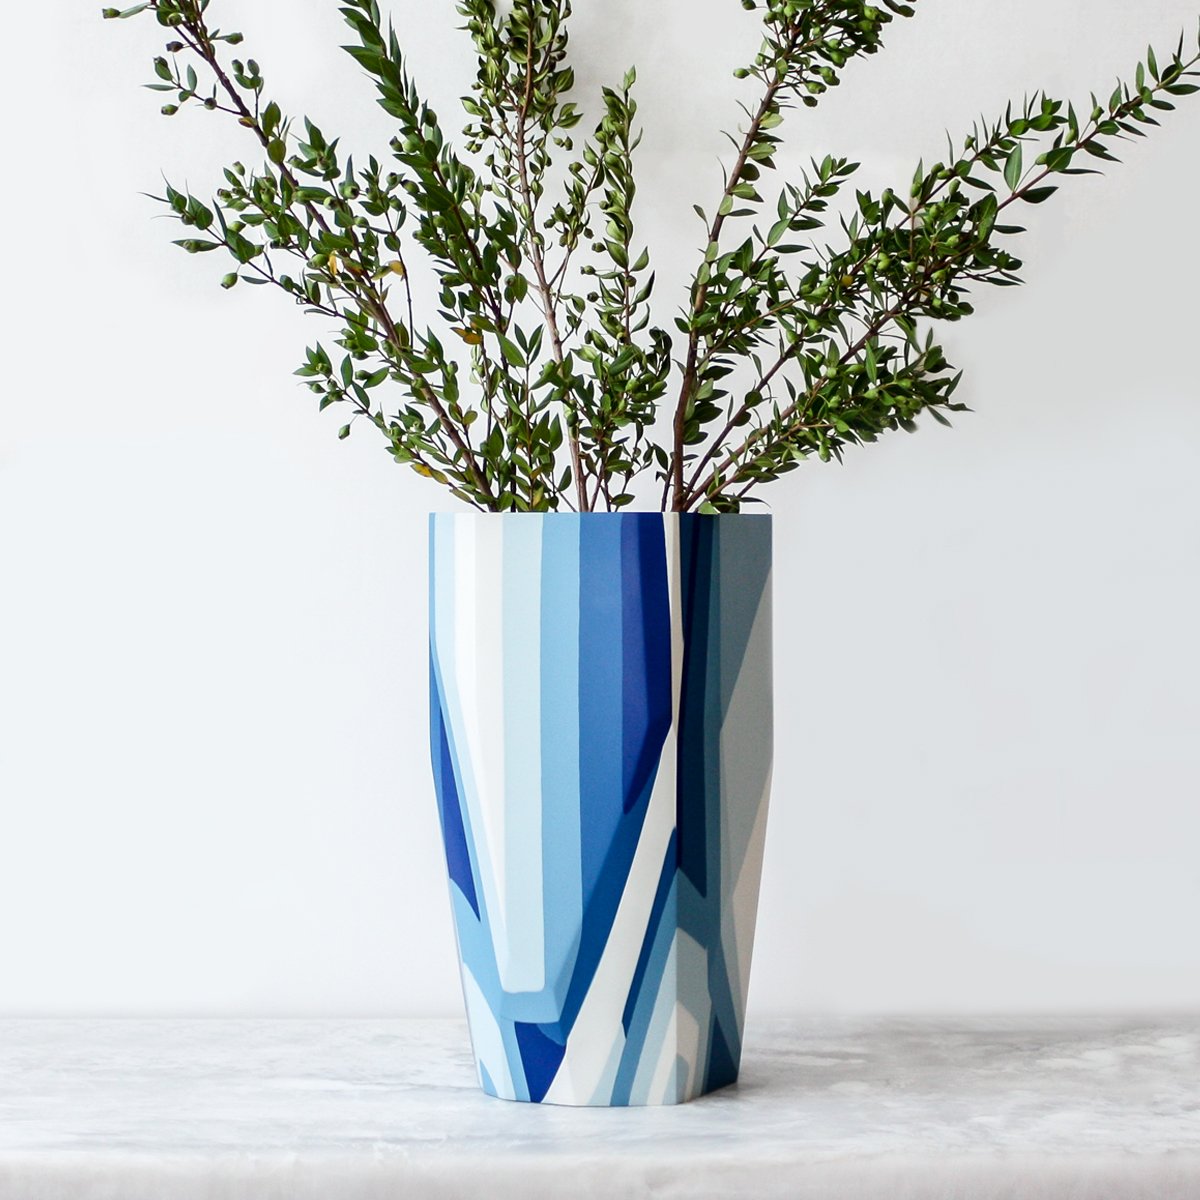 Lands End Vase made of resin and plaster in shades of blue by Anyon and Elyse Graham